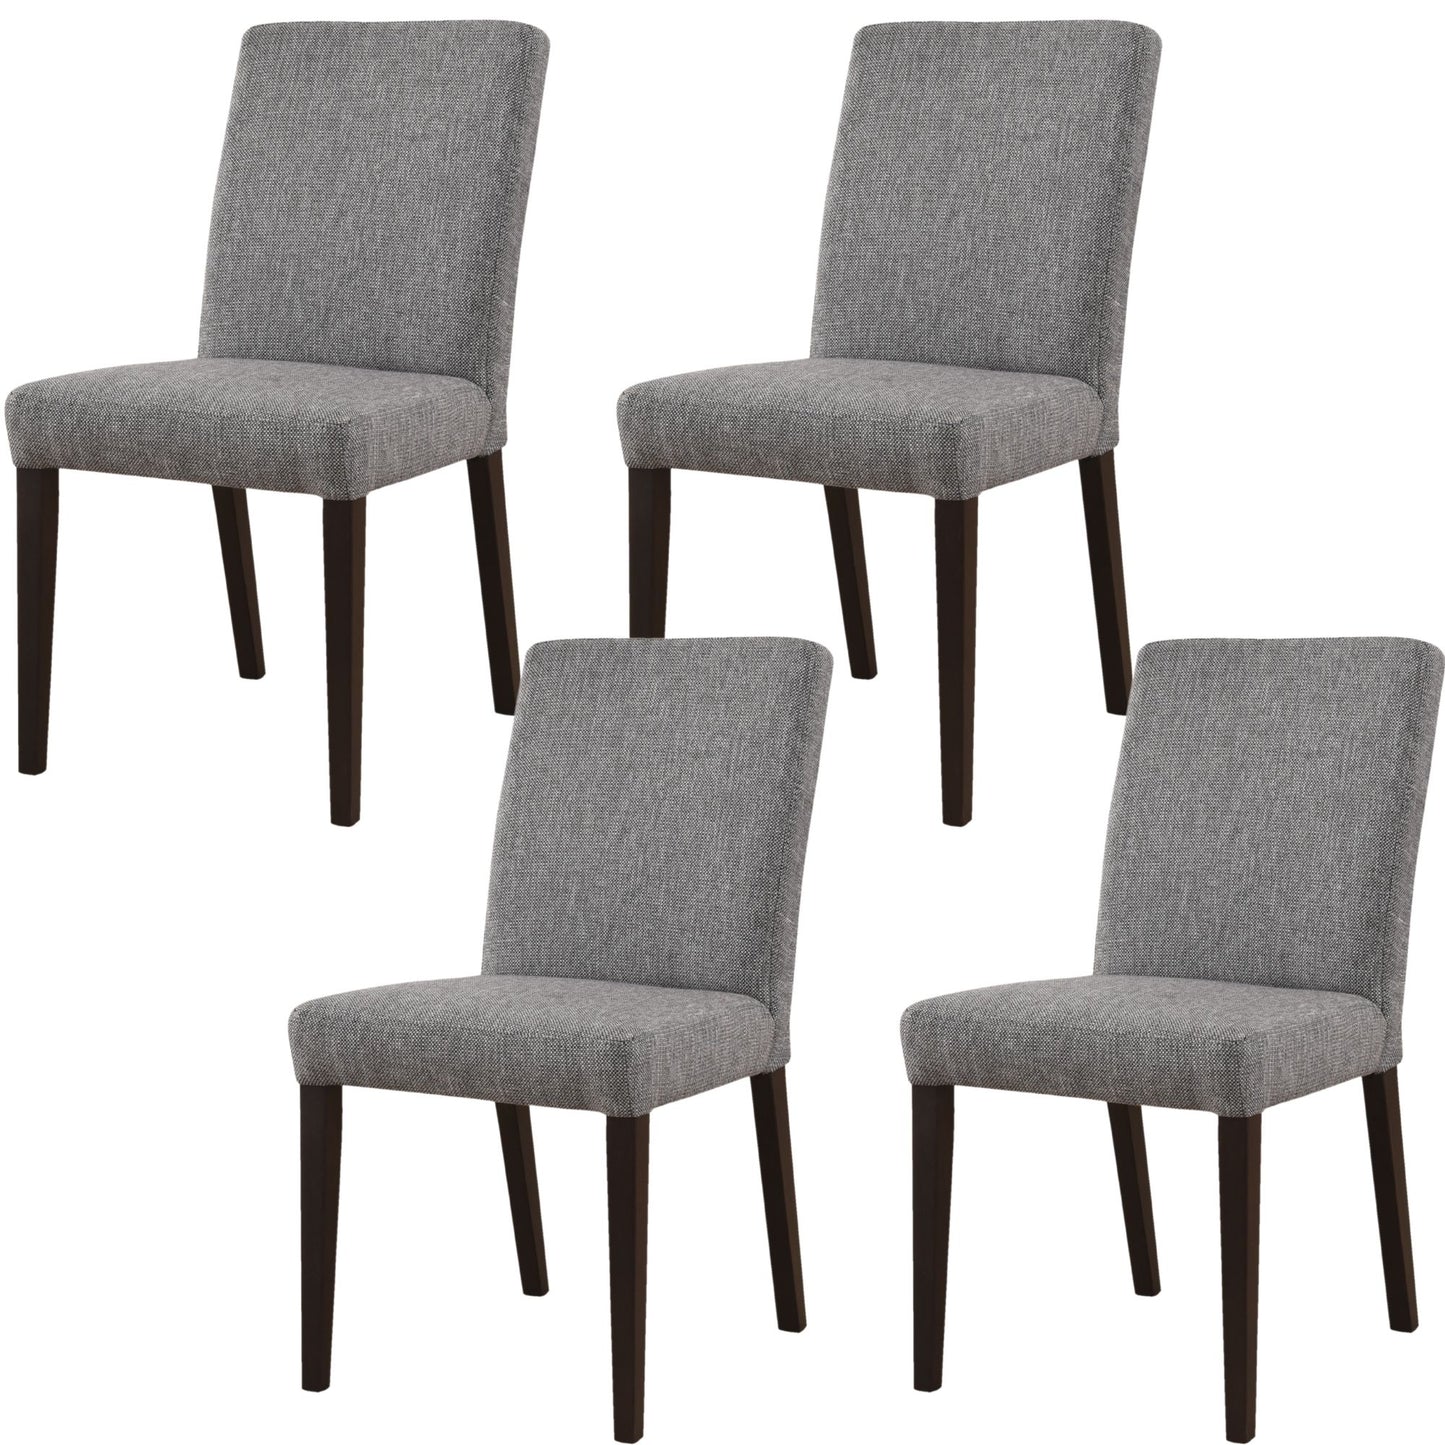 Catmint Dining Chair Set of 4 Fabric Upholstered Solid Acacia Wood - Granite